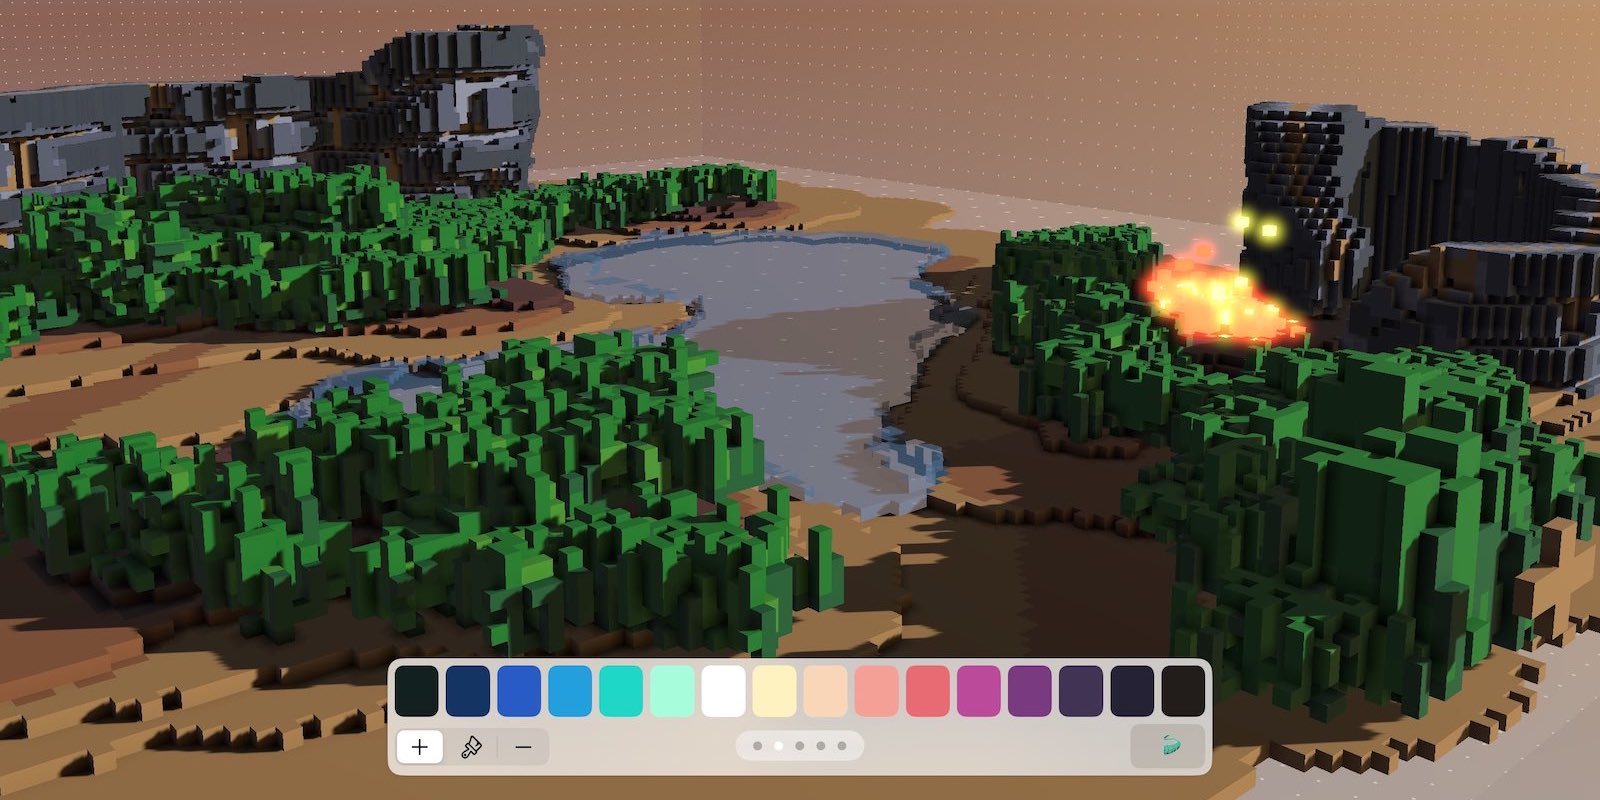 Voxel Brush is out now